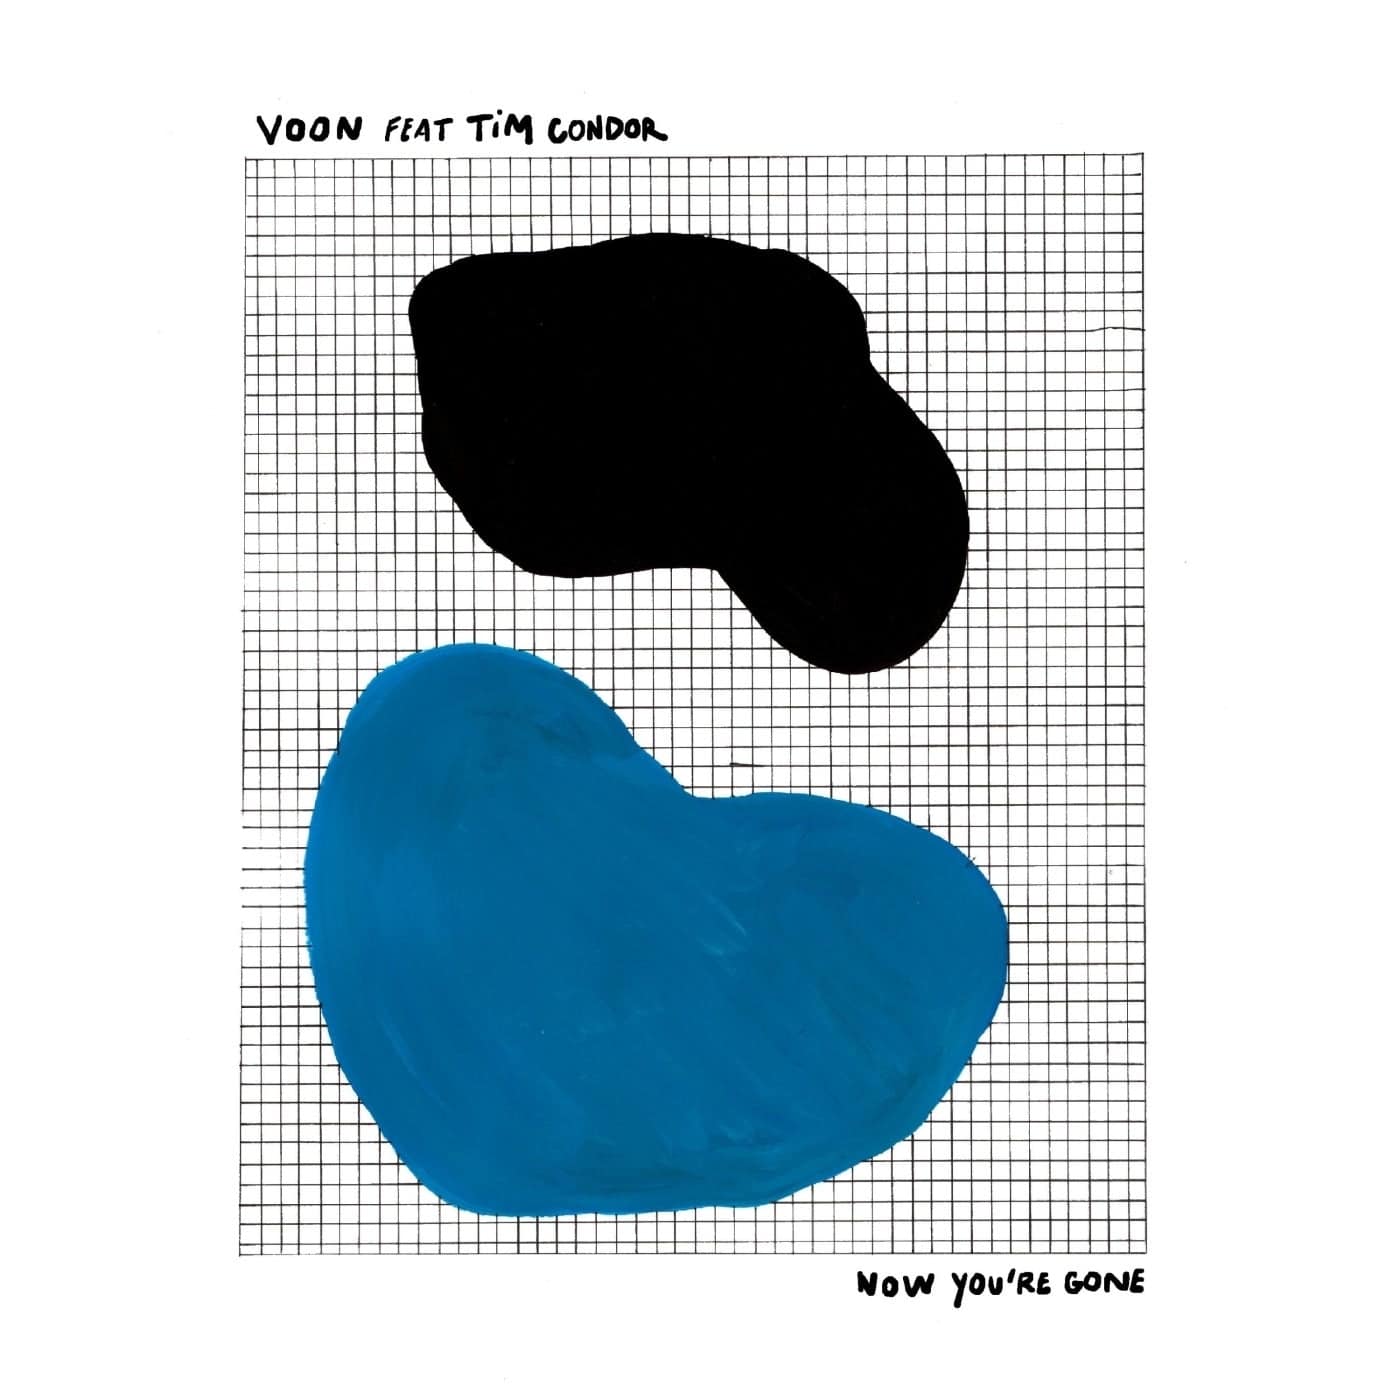 Download Voon - Now You're Gone